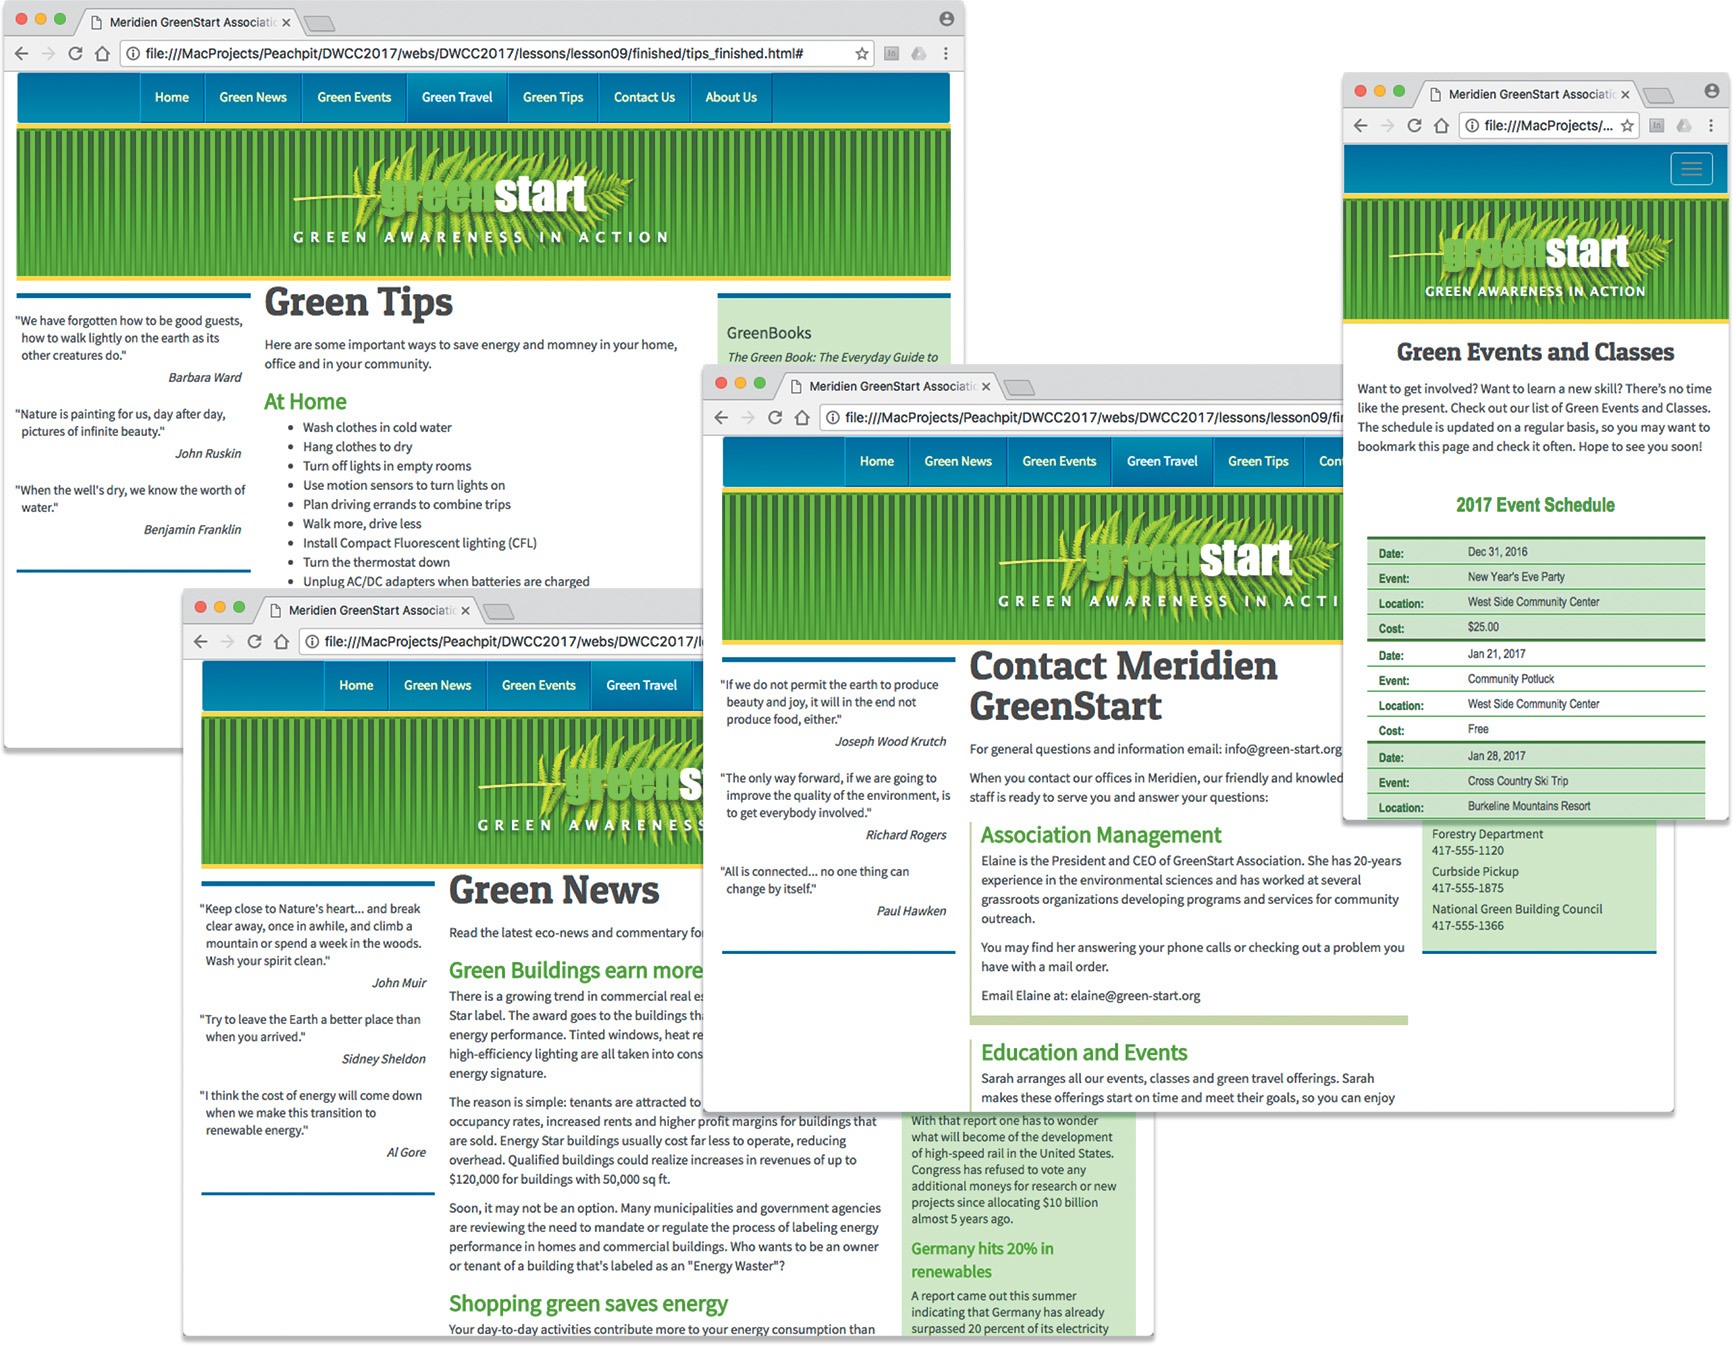 A set of various screens shows show pages with lists, tables, and the regular text.